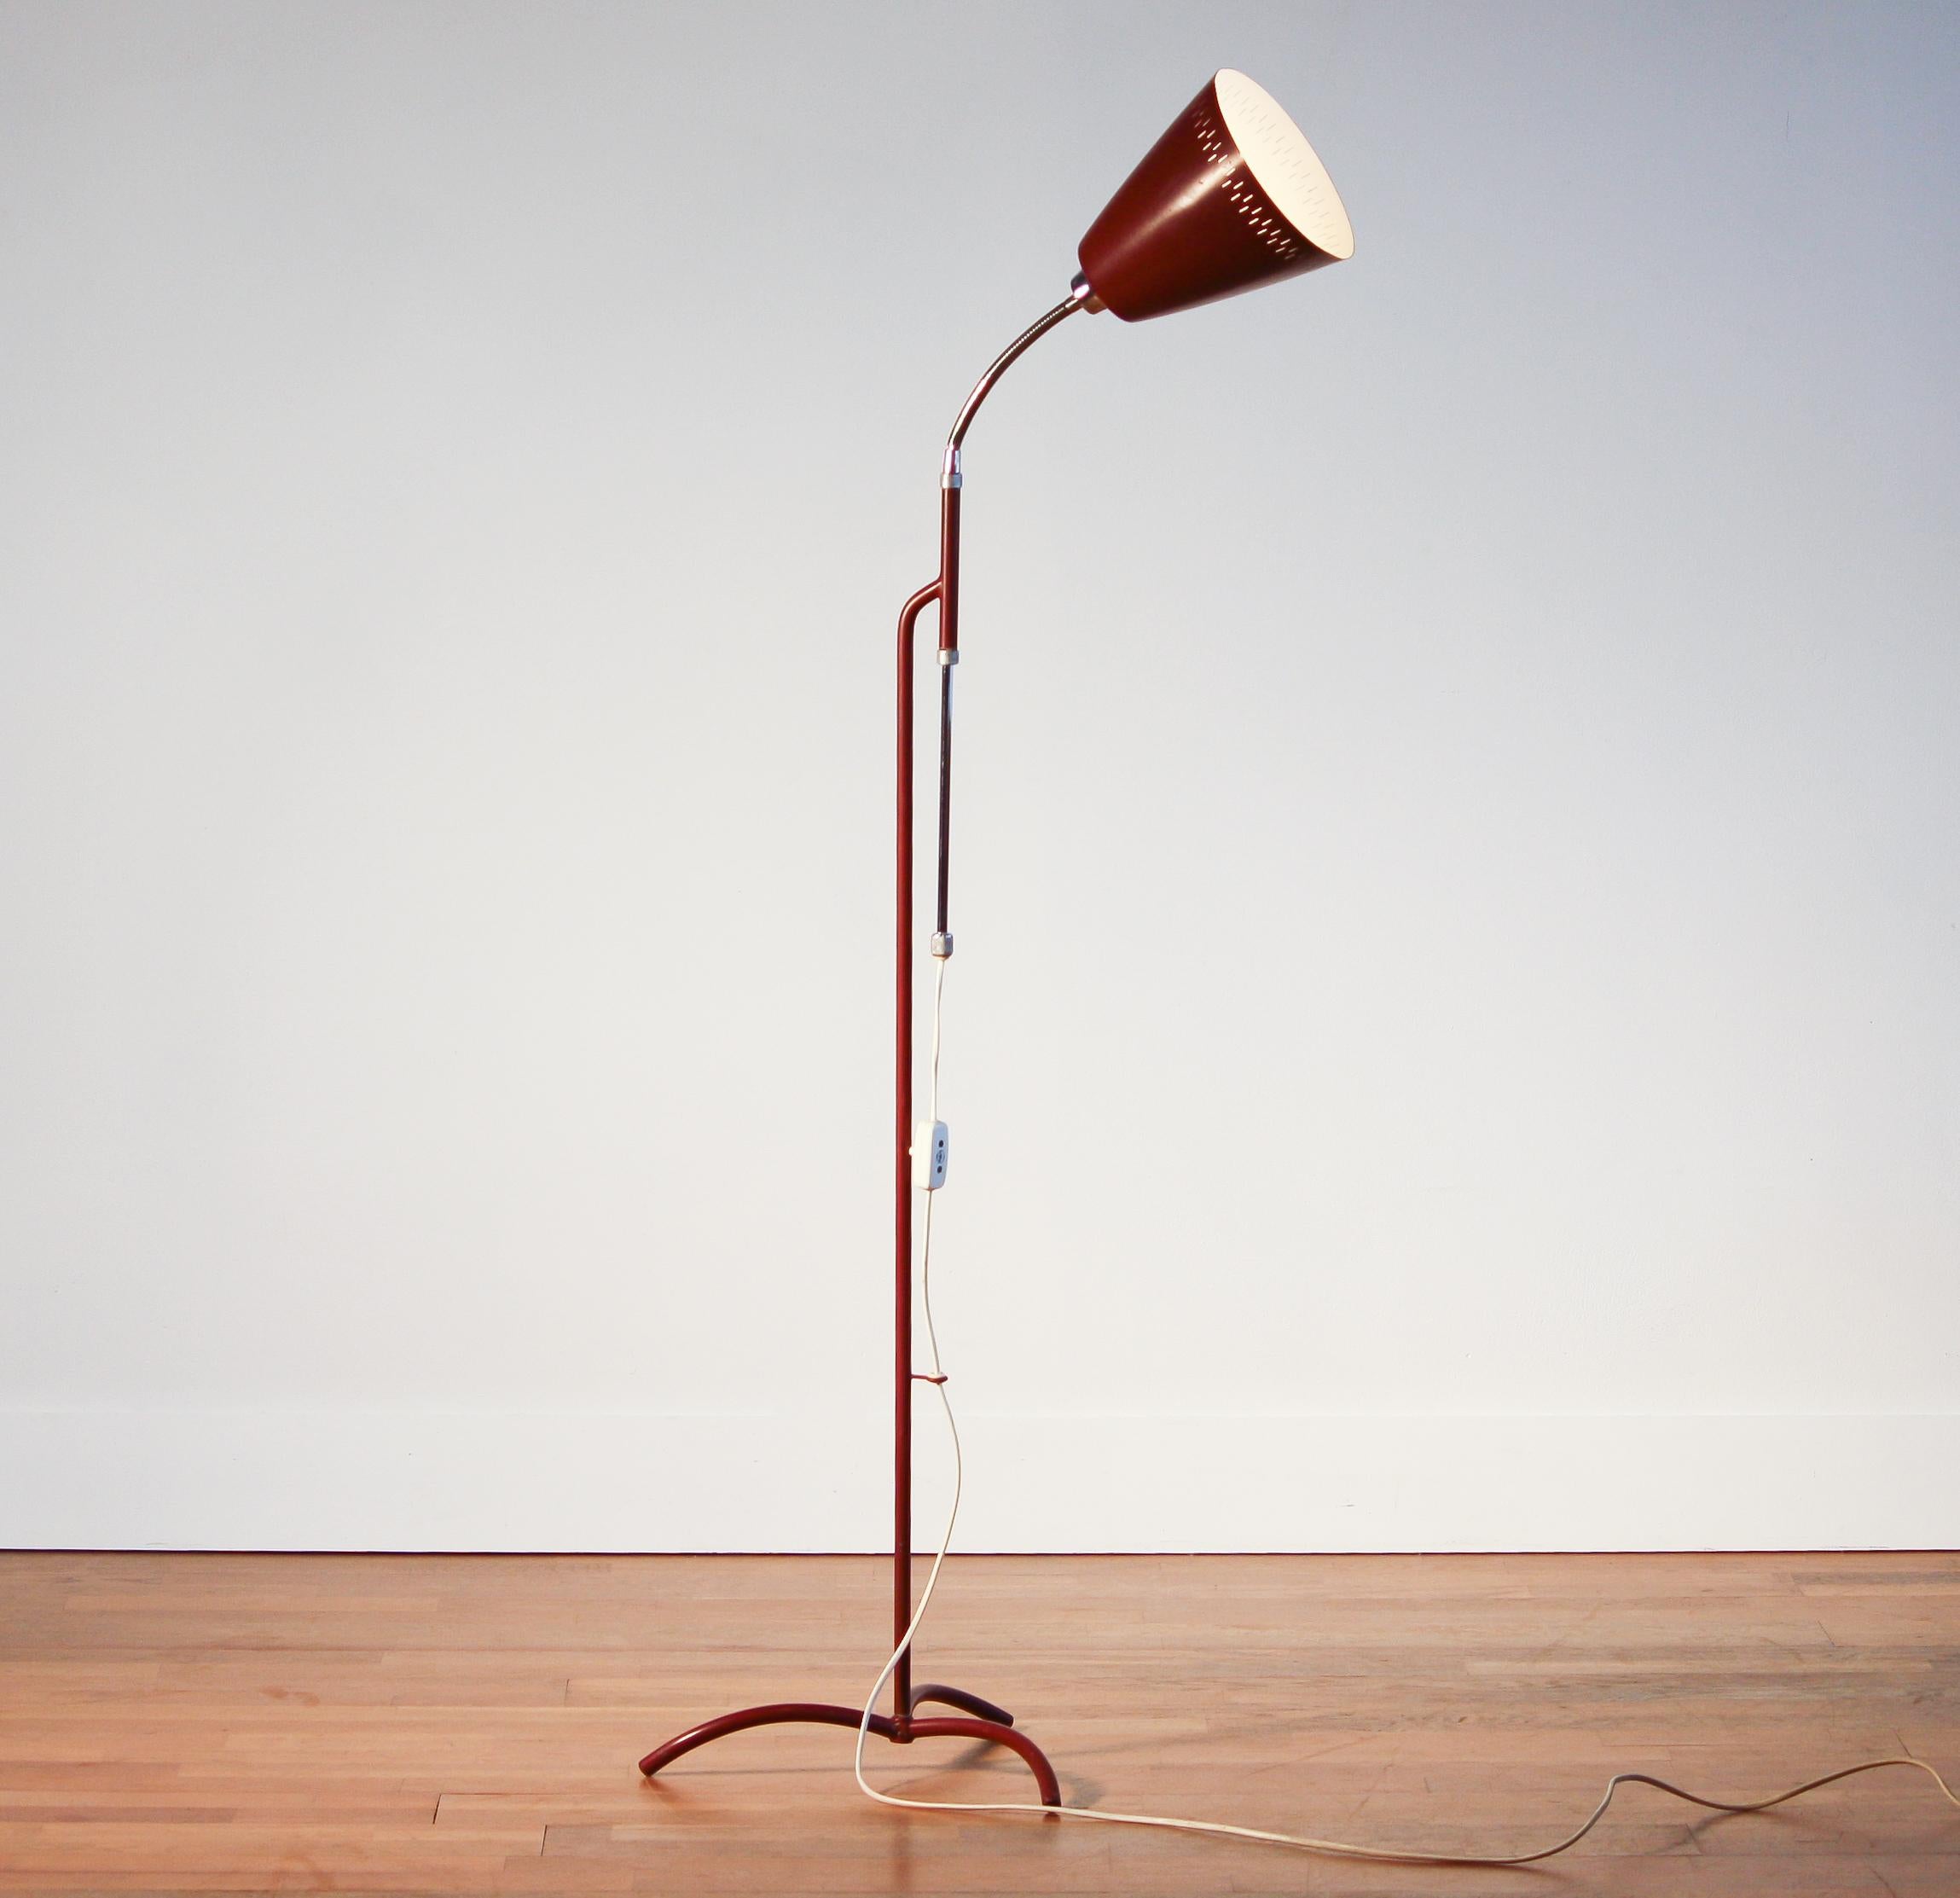 Beautiful red floor lamp designed by Hans Bergström, Sweden.
This lamp is made of metal with brass details and has a very rare Stand.
It remains fully functional and in a nice condition.
Period 1950s.
Dimensions: H 154 cm, ø 18 cm.